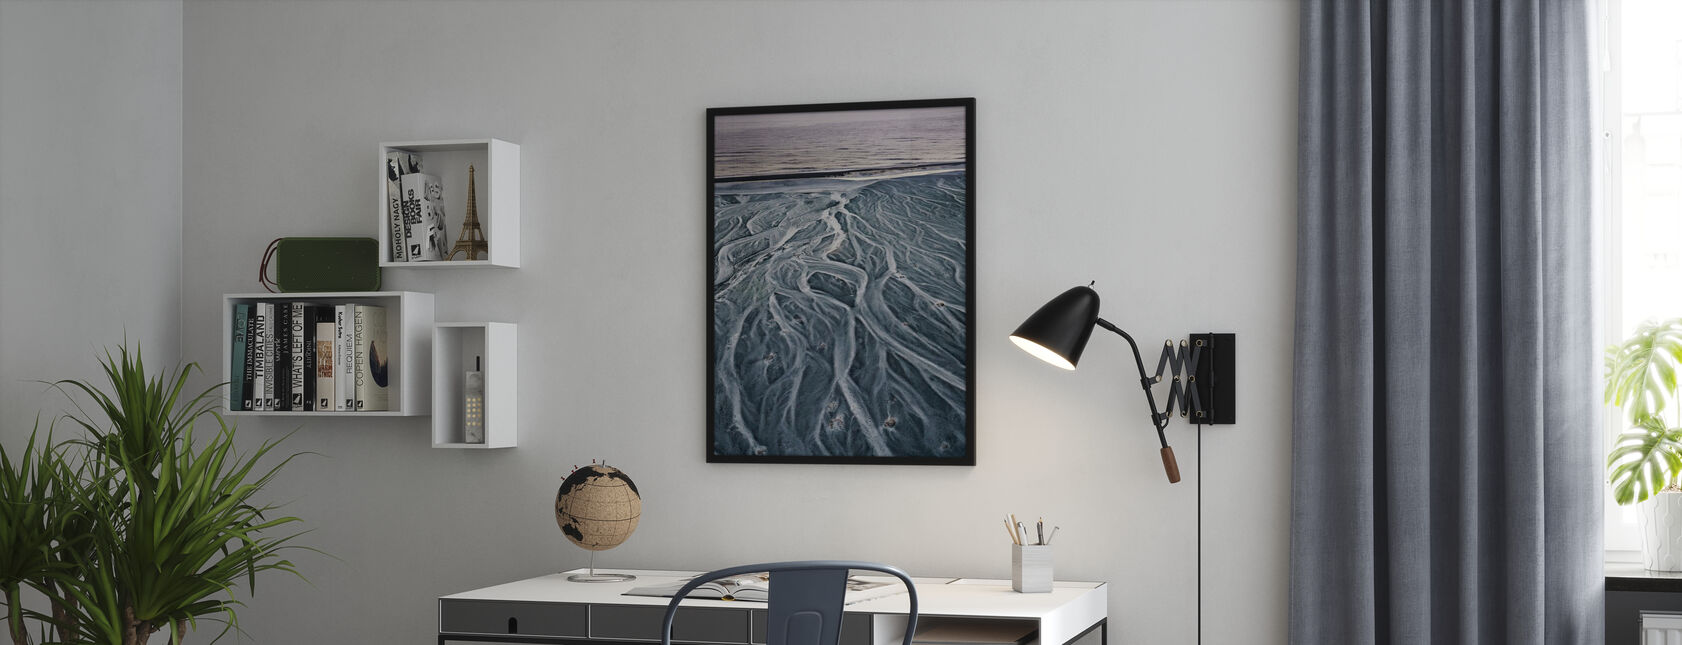 Braided River - Poster - Office